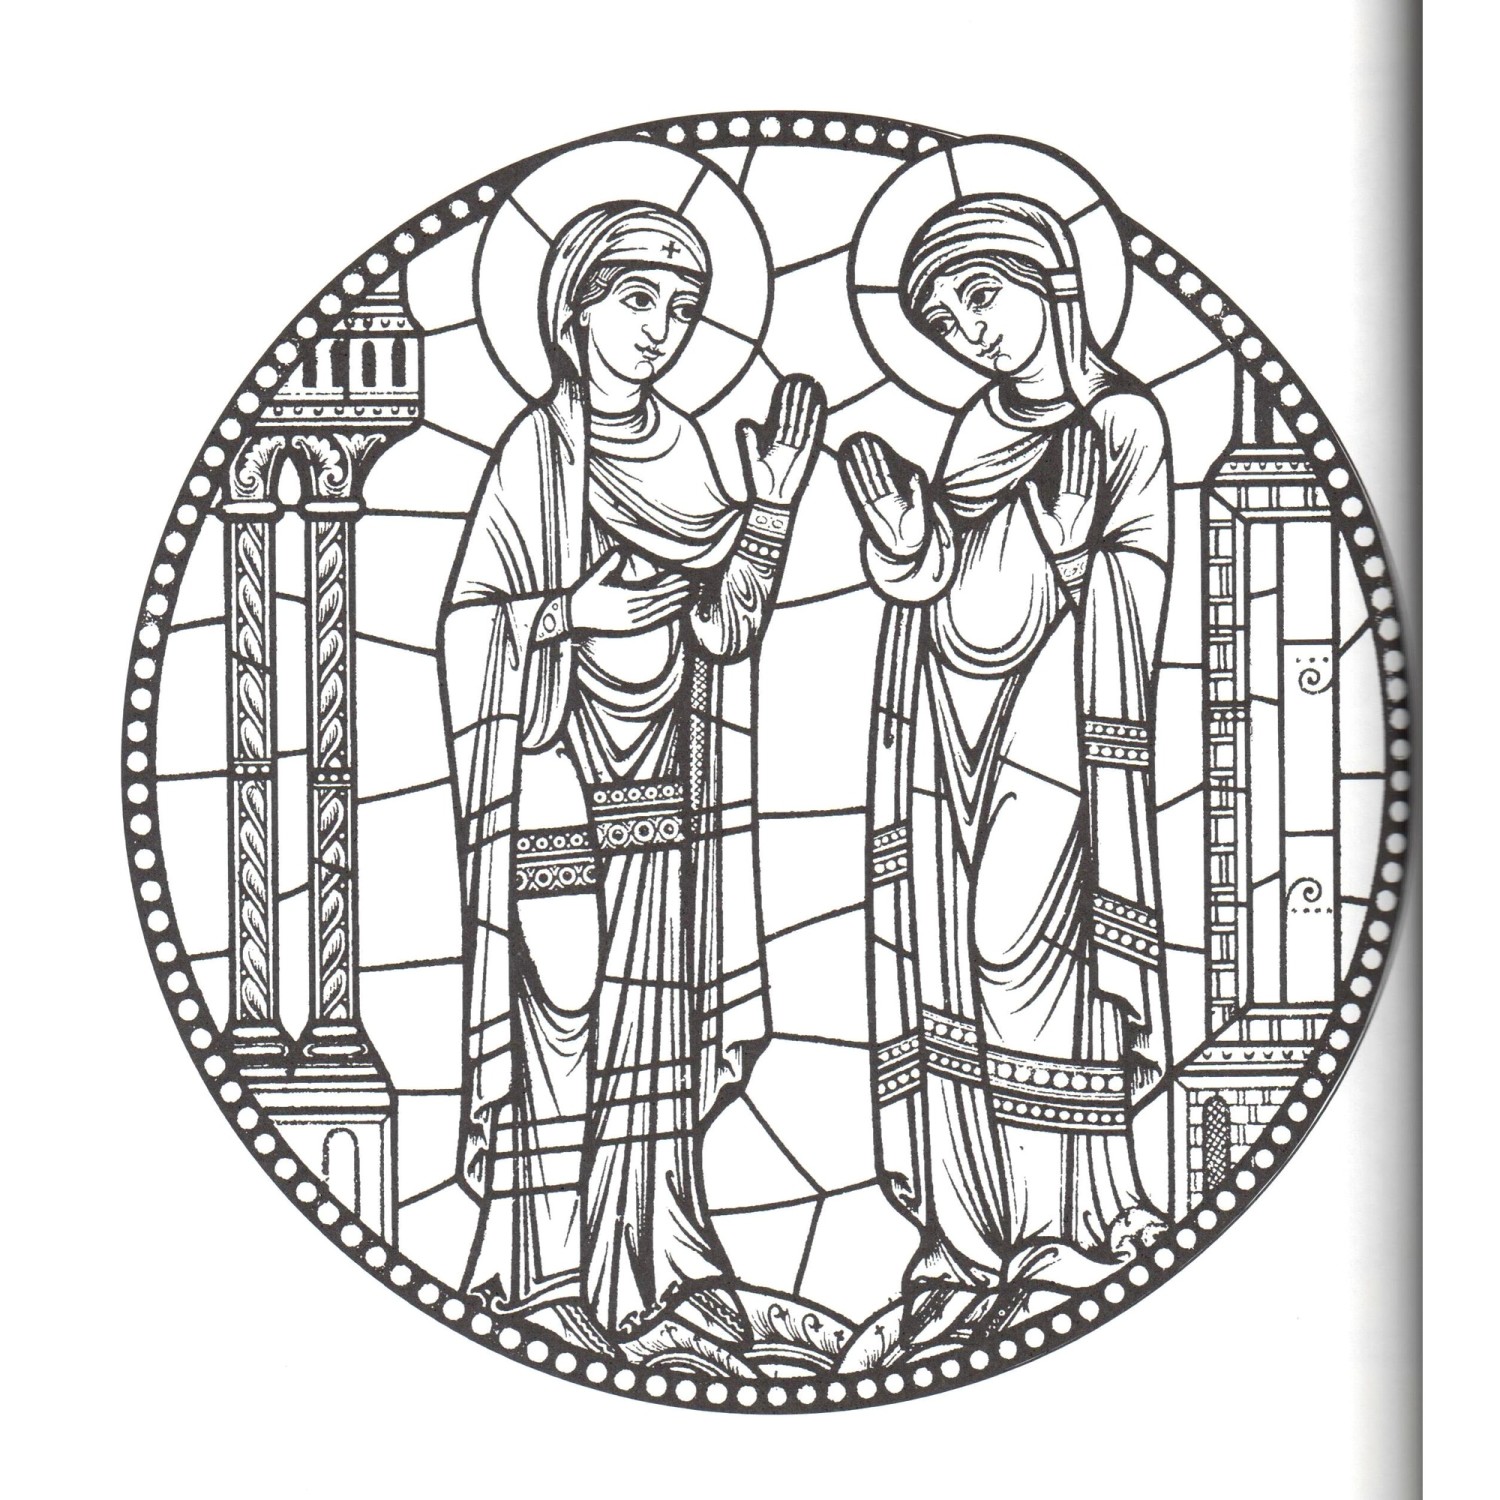 Windows into christ coloring book the catholic pany